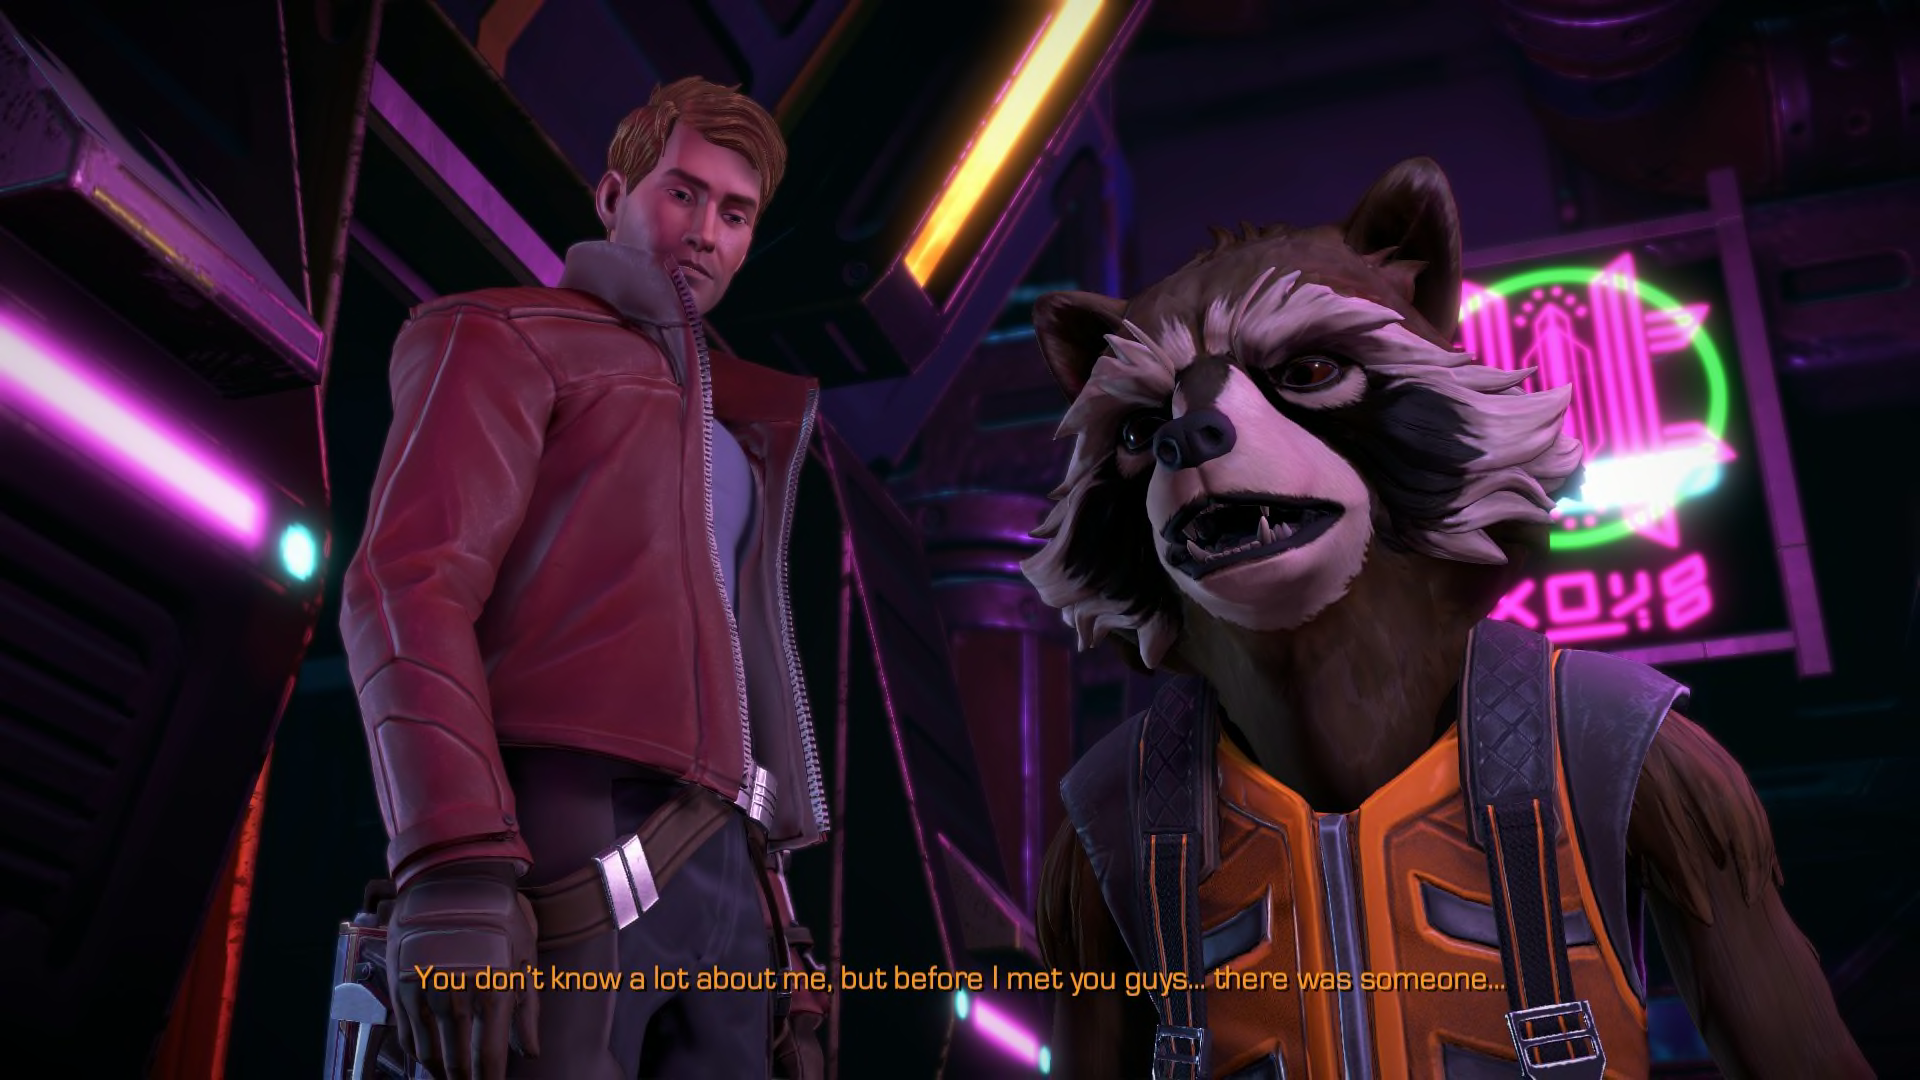 download tell tale guardians of the galaxy for free